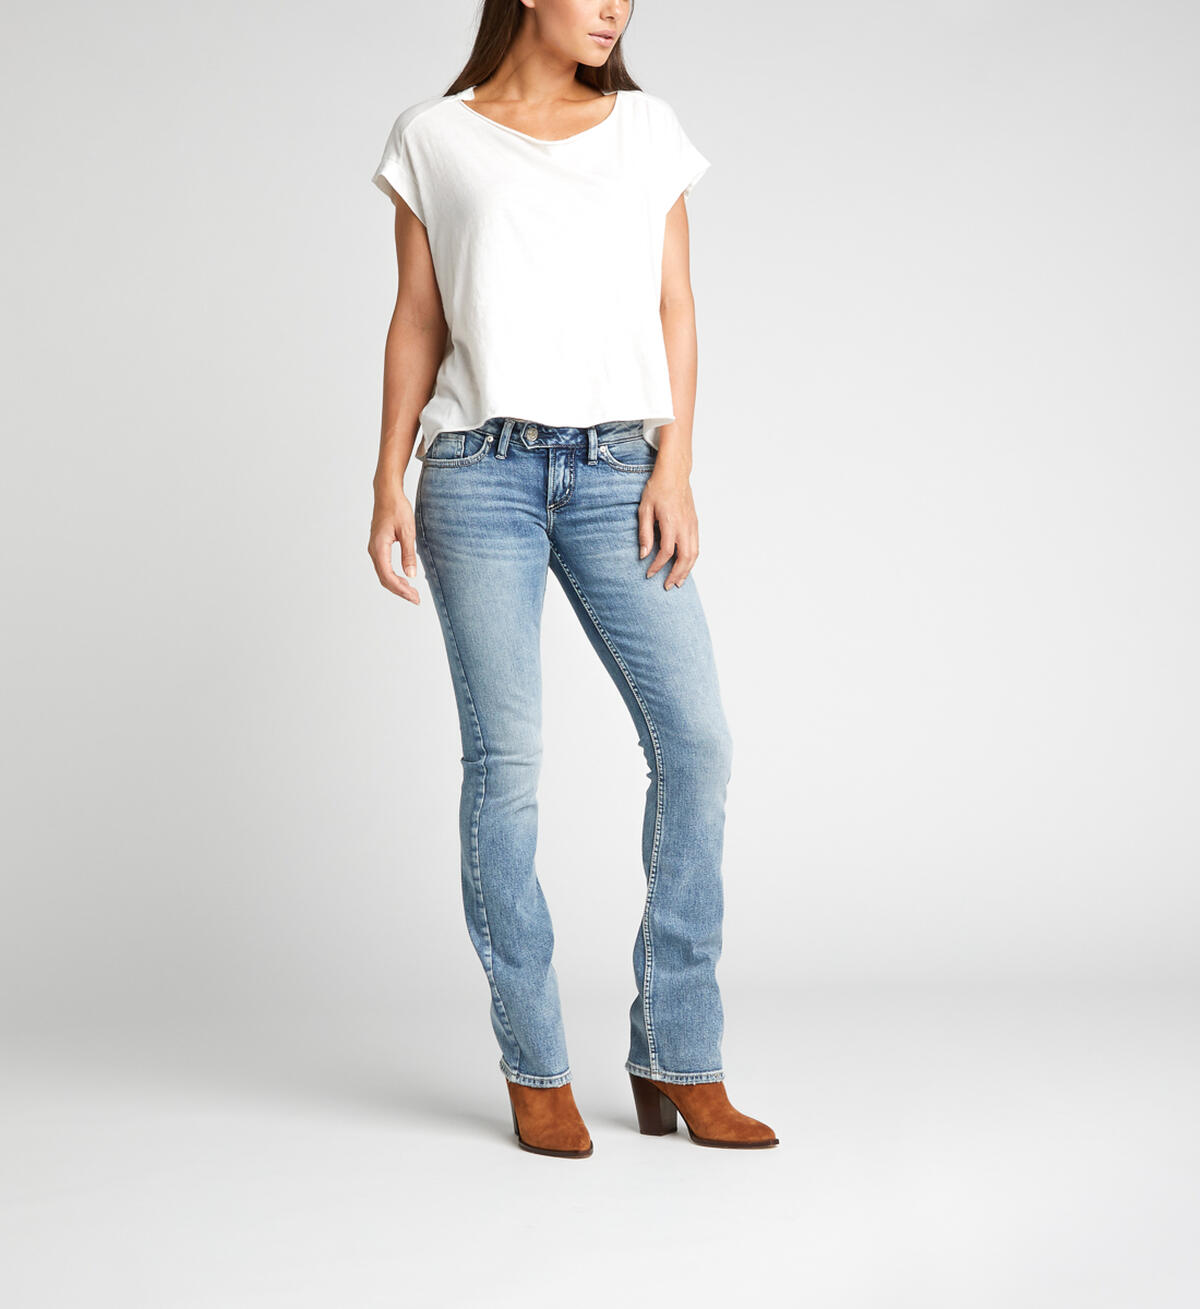 Tuesday Low Rise Slim Bootcut Jeans Final Sale, , hi-res image number 0